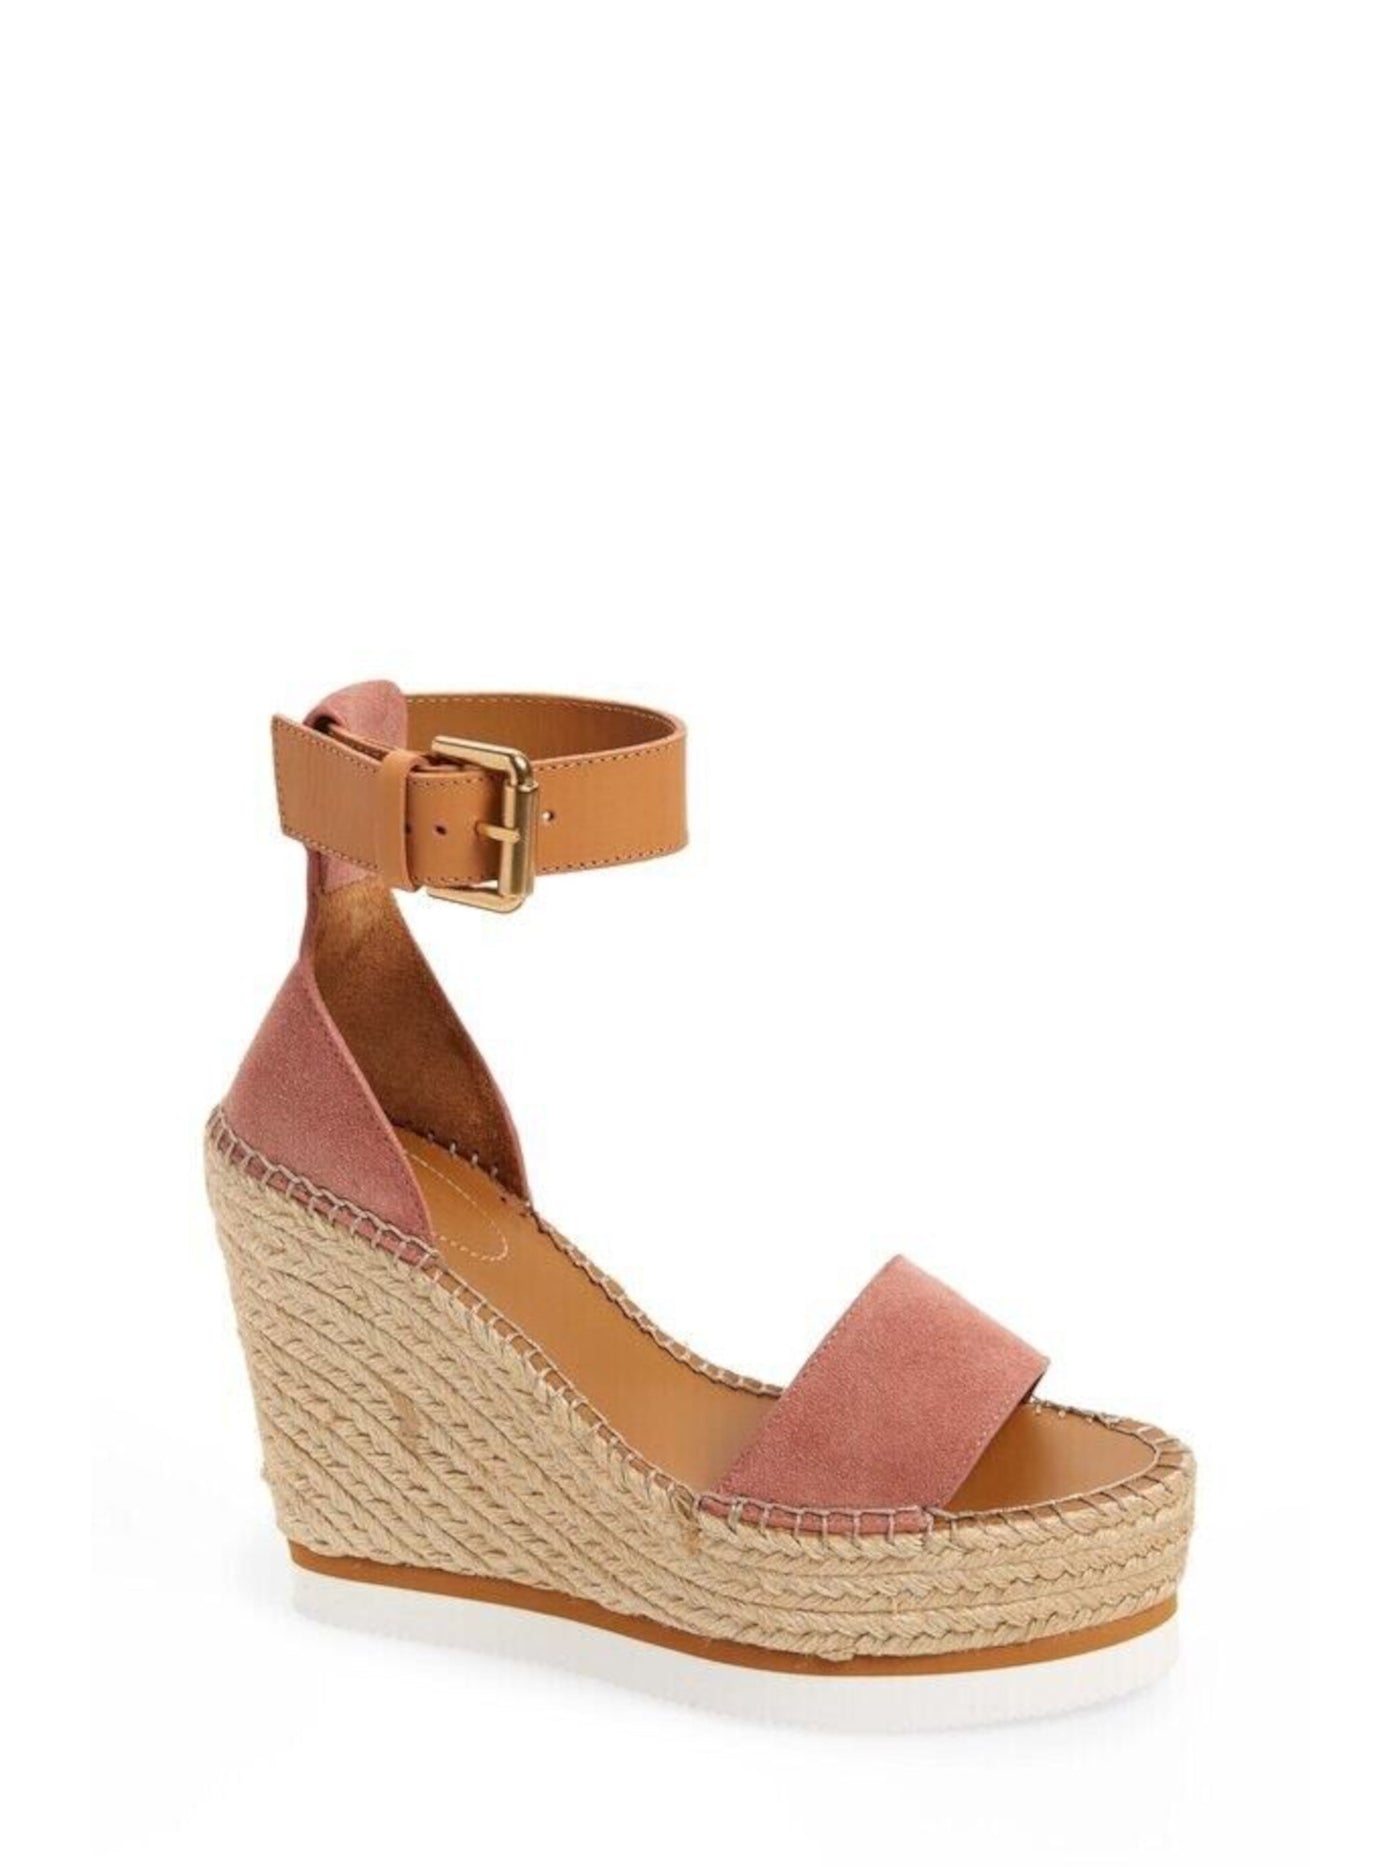 SEE BY CHLOE Womens Pink Ankle Strap Woven Glyn Round Toe Wedge Buckle Leather Espadrille Shoes 40